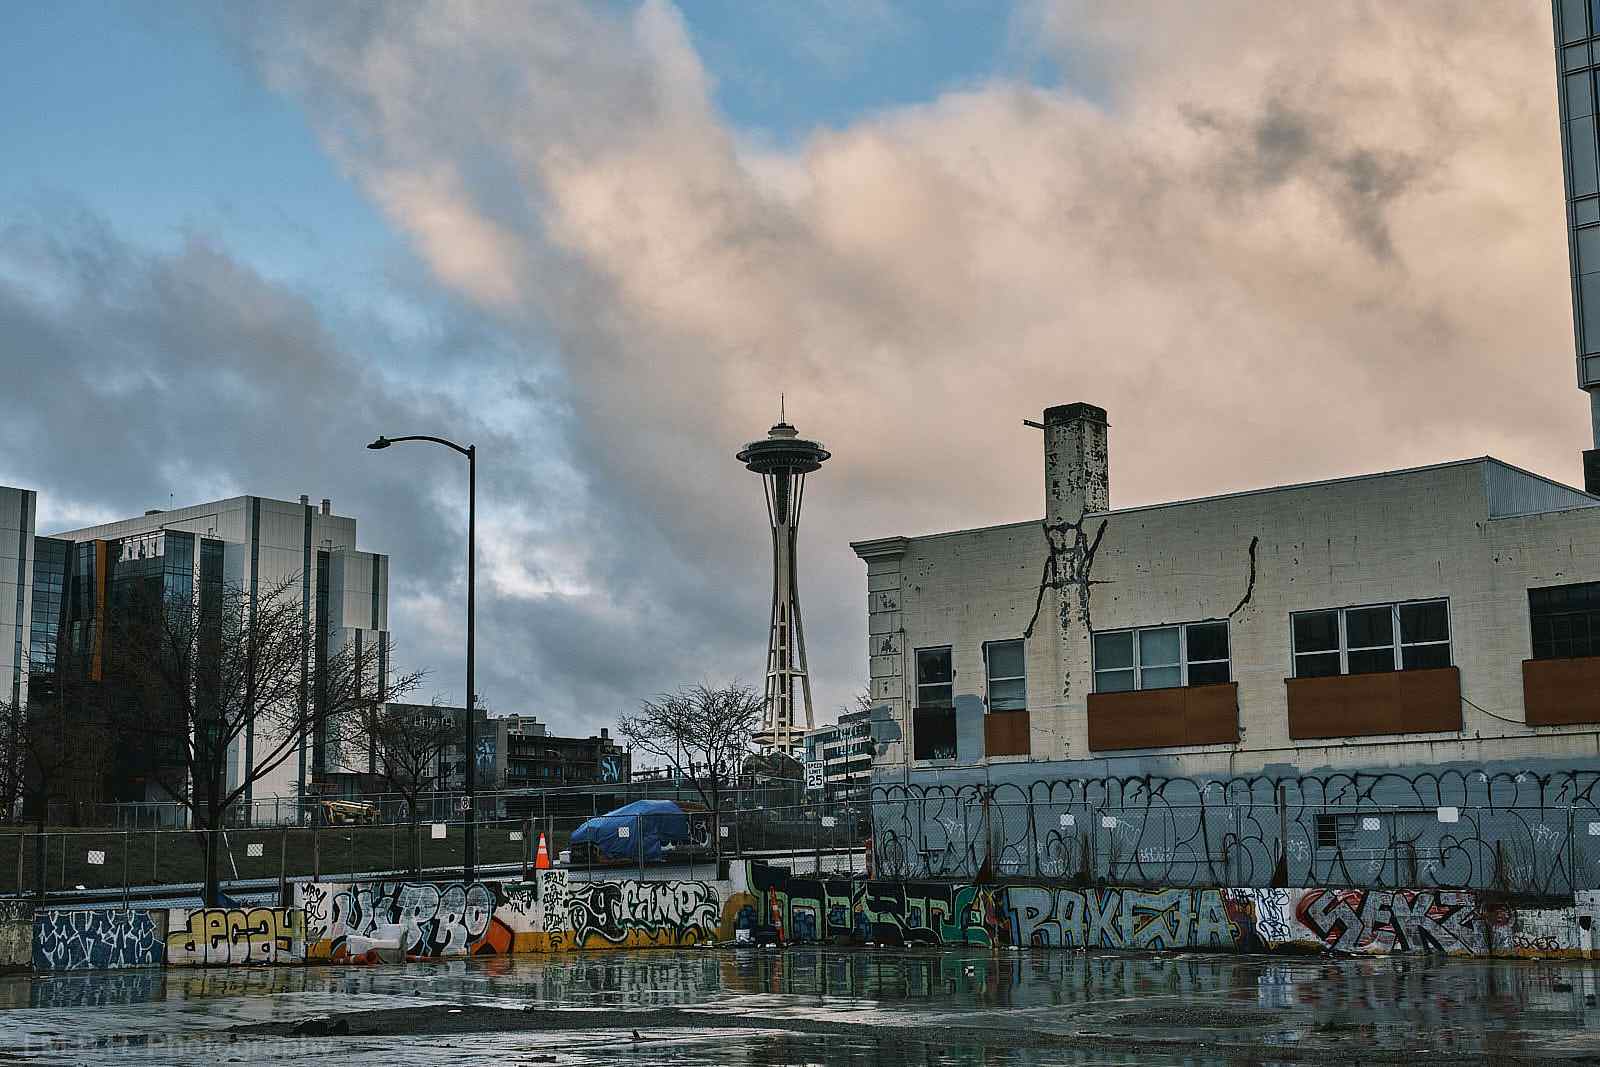 The Seattle Space Needle seen across a littered , graffitied vacant lot